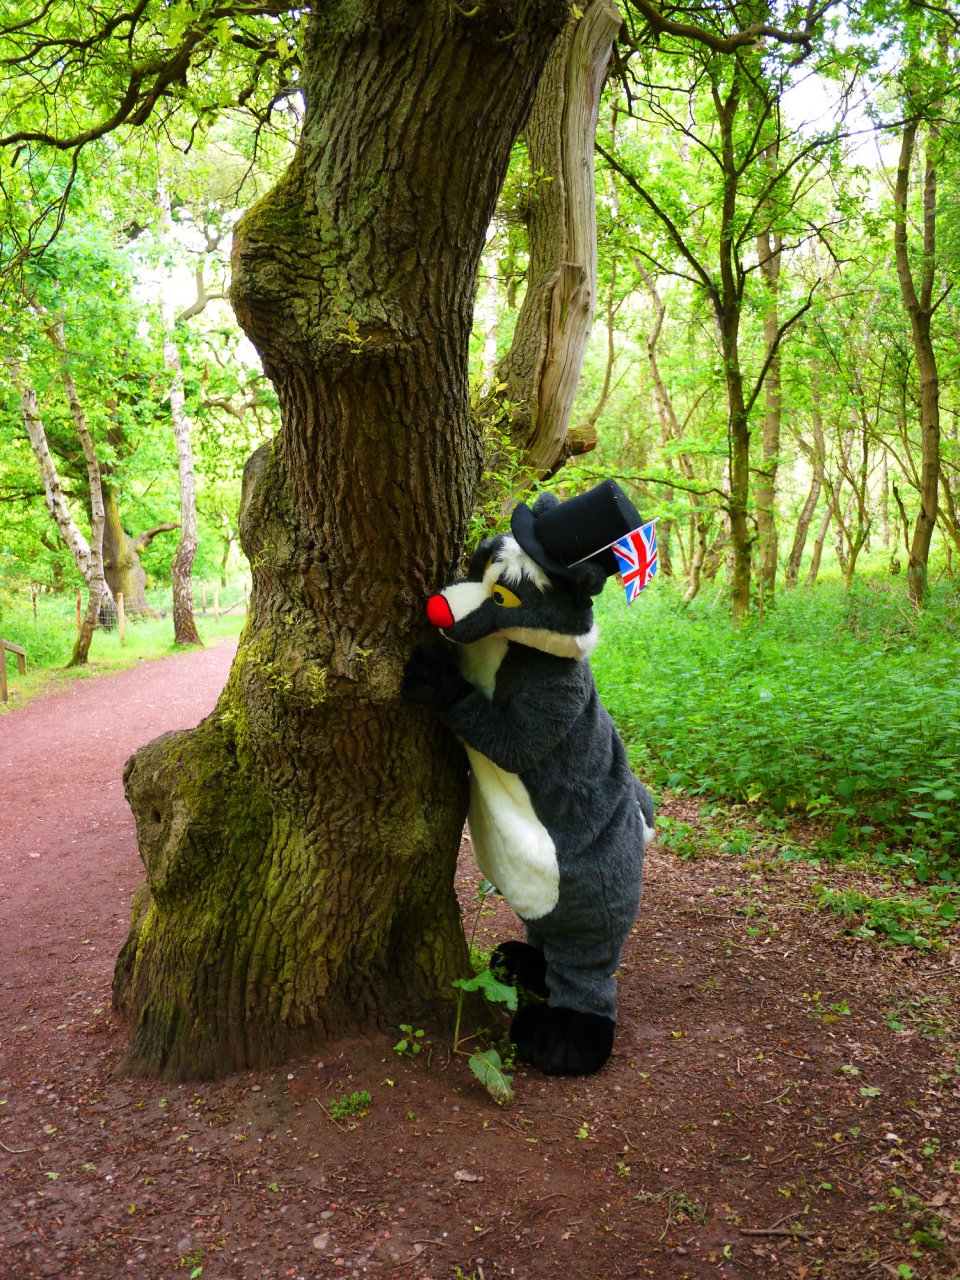 Brok the Badger peeking from behind a tree